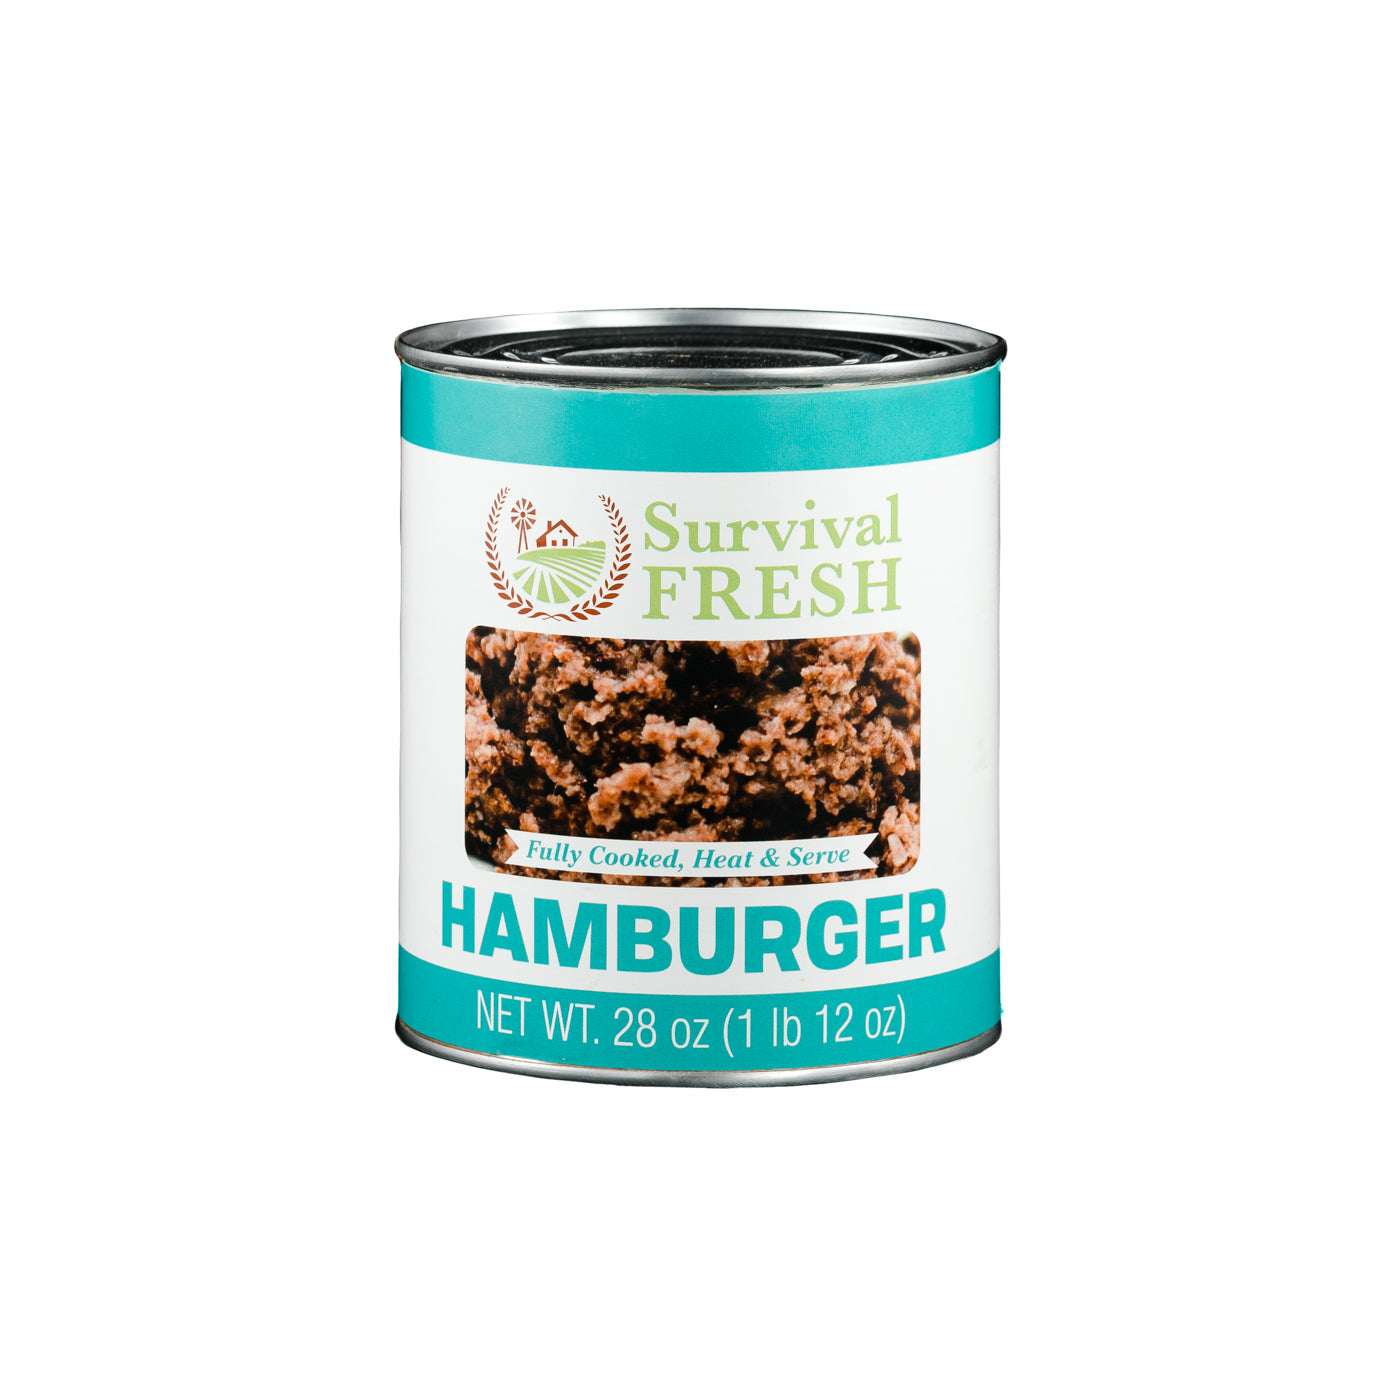 VIP Special - 3 Protein Mixed Canned Meat 28oz + FREE 3 BONUS Cans